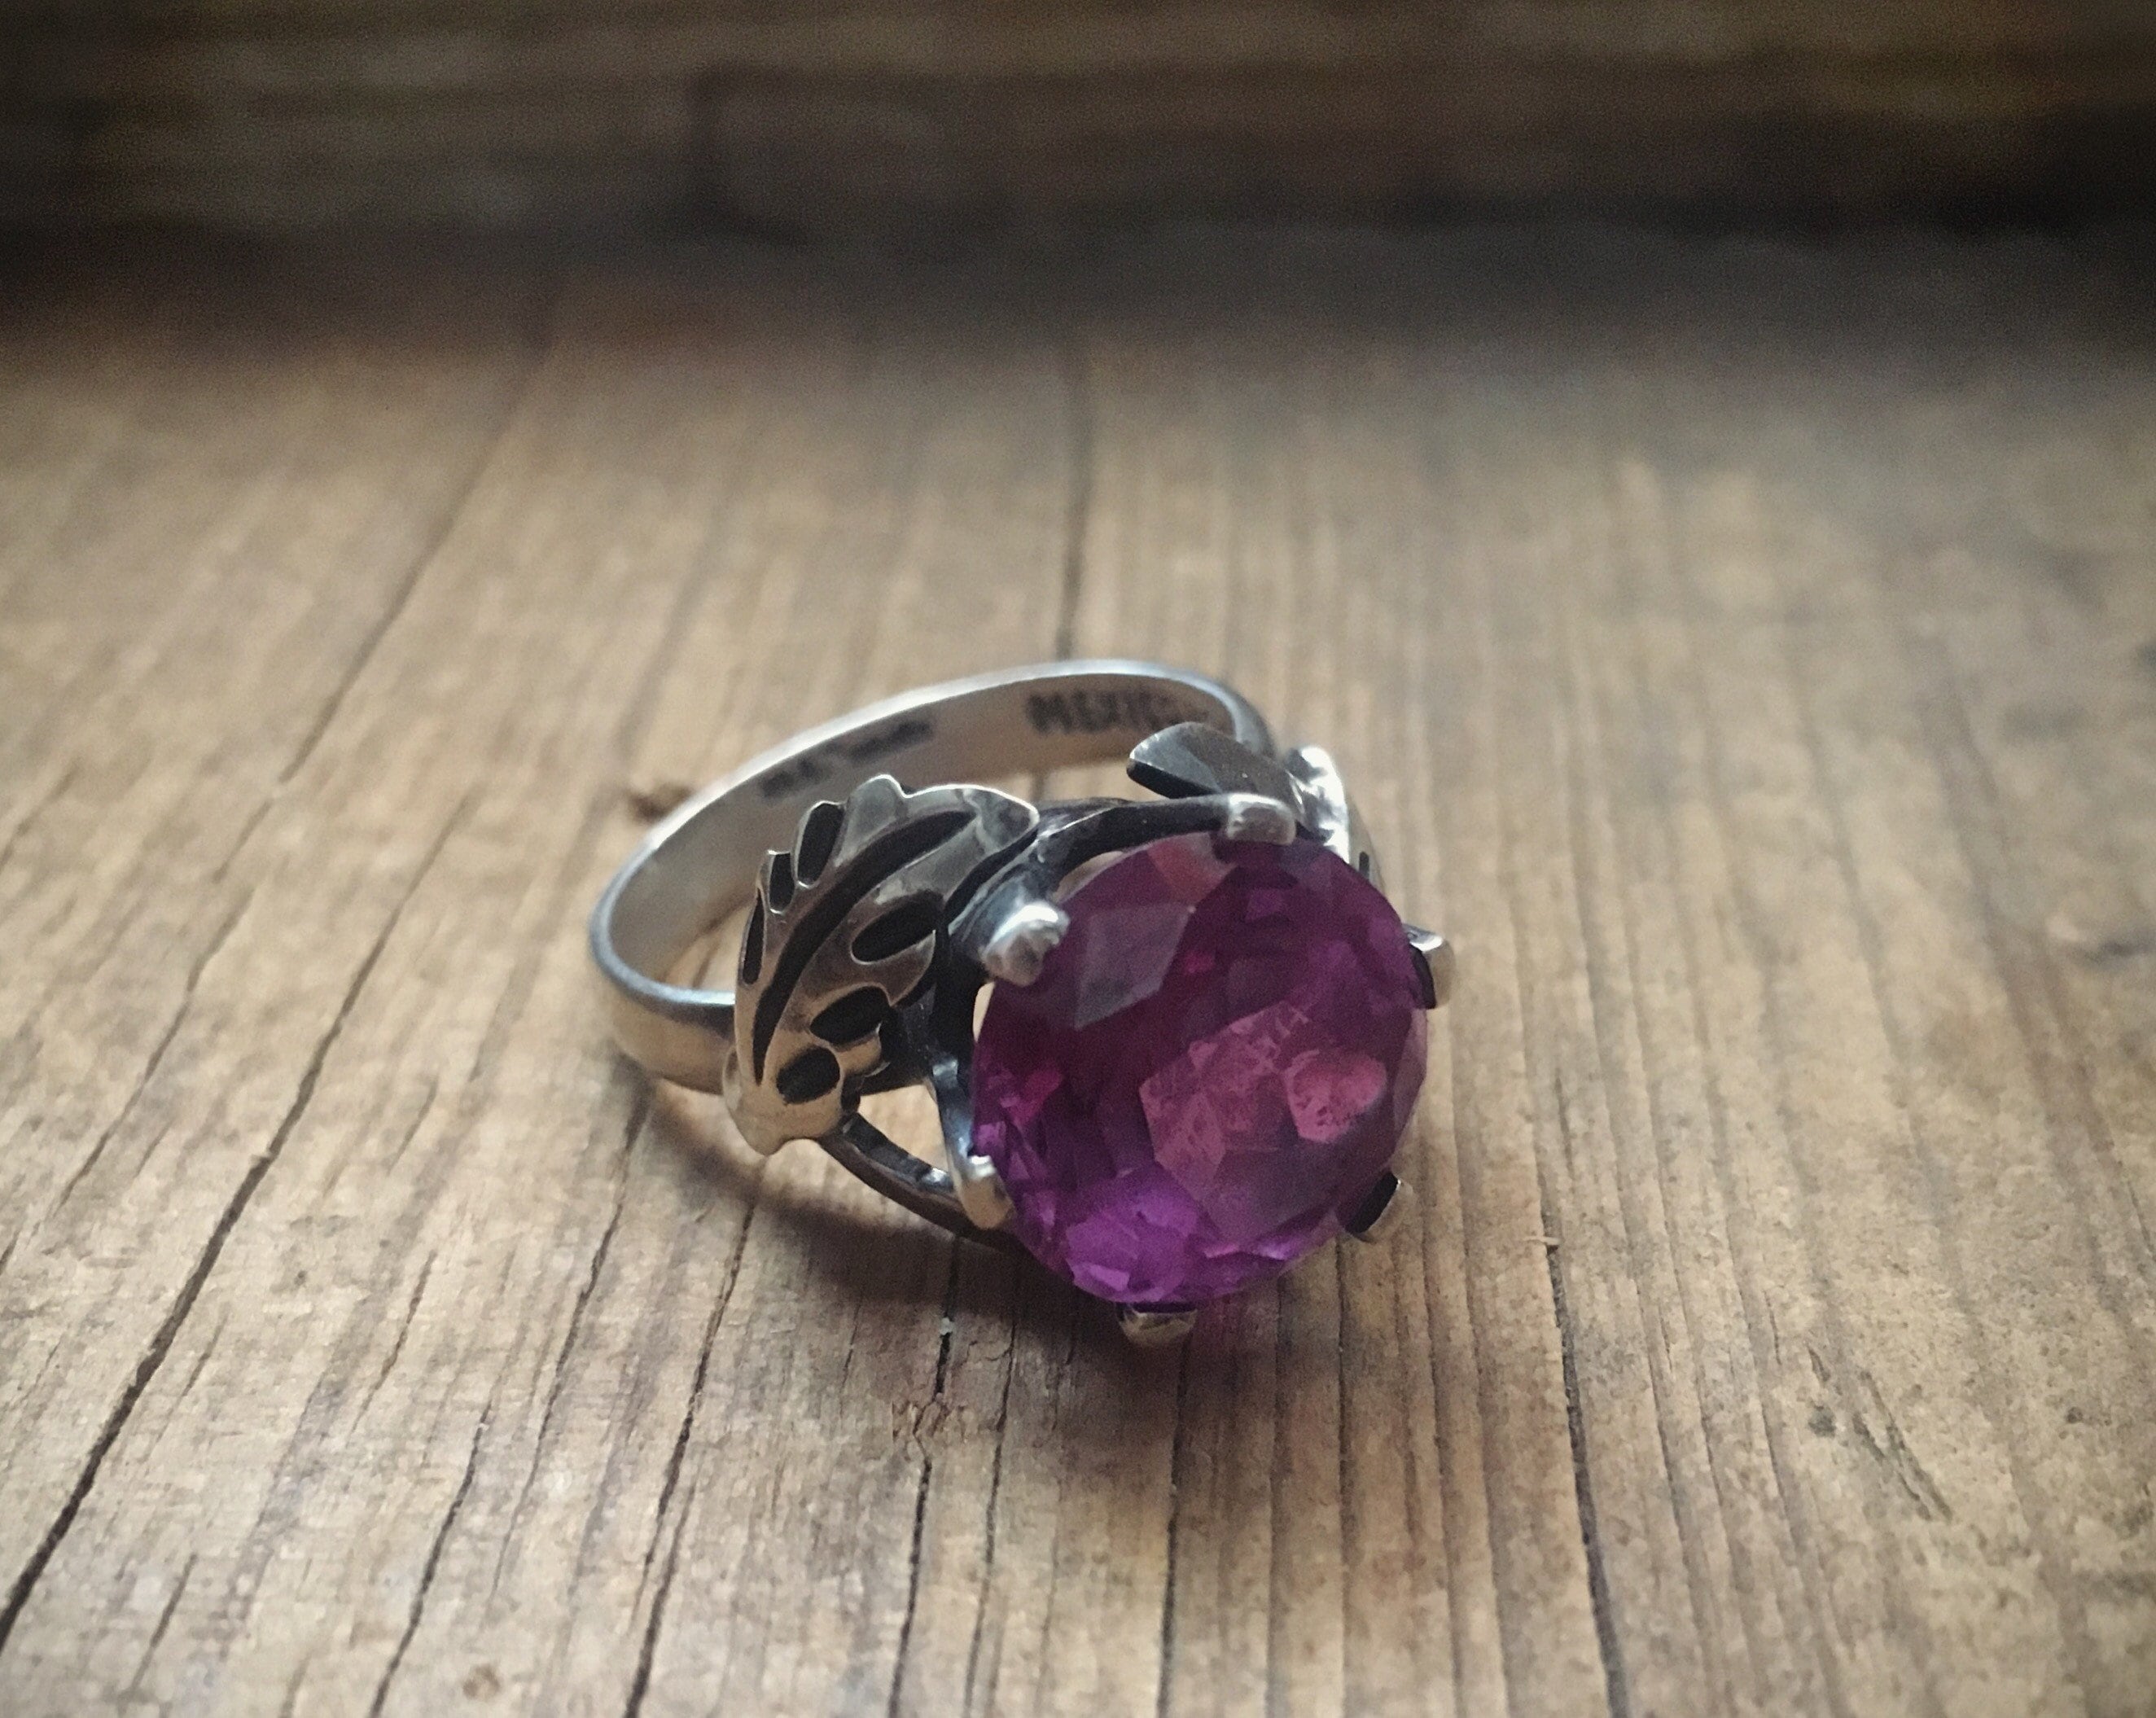 Vintage Mexican Silver Ring Amethyst or Manmade Alexandrite Gemstone ...